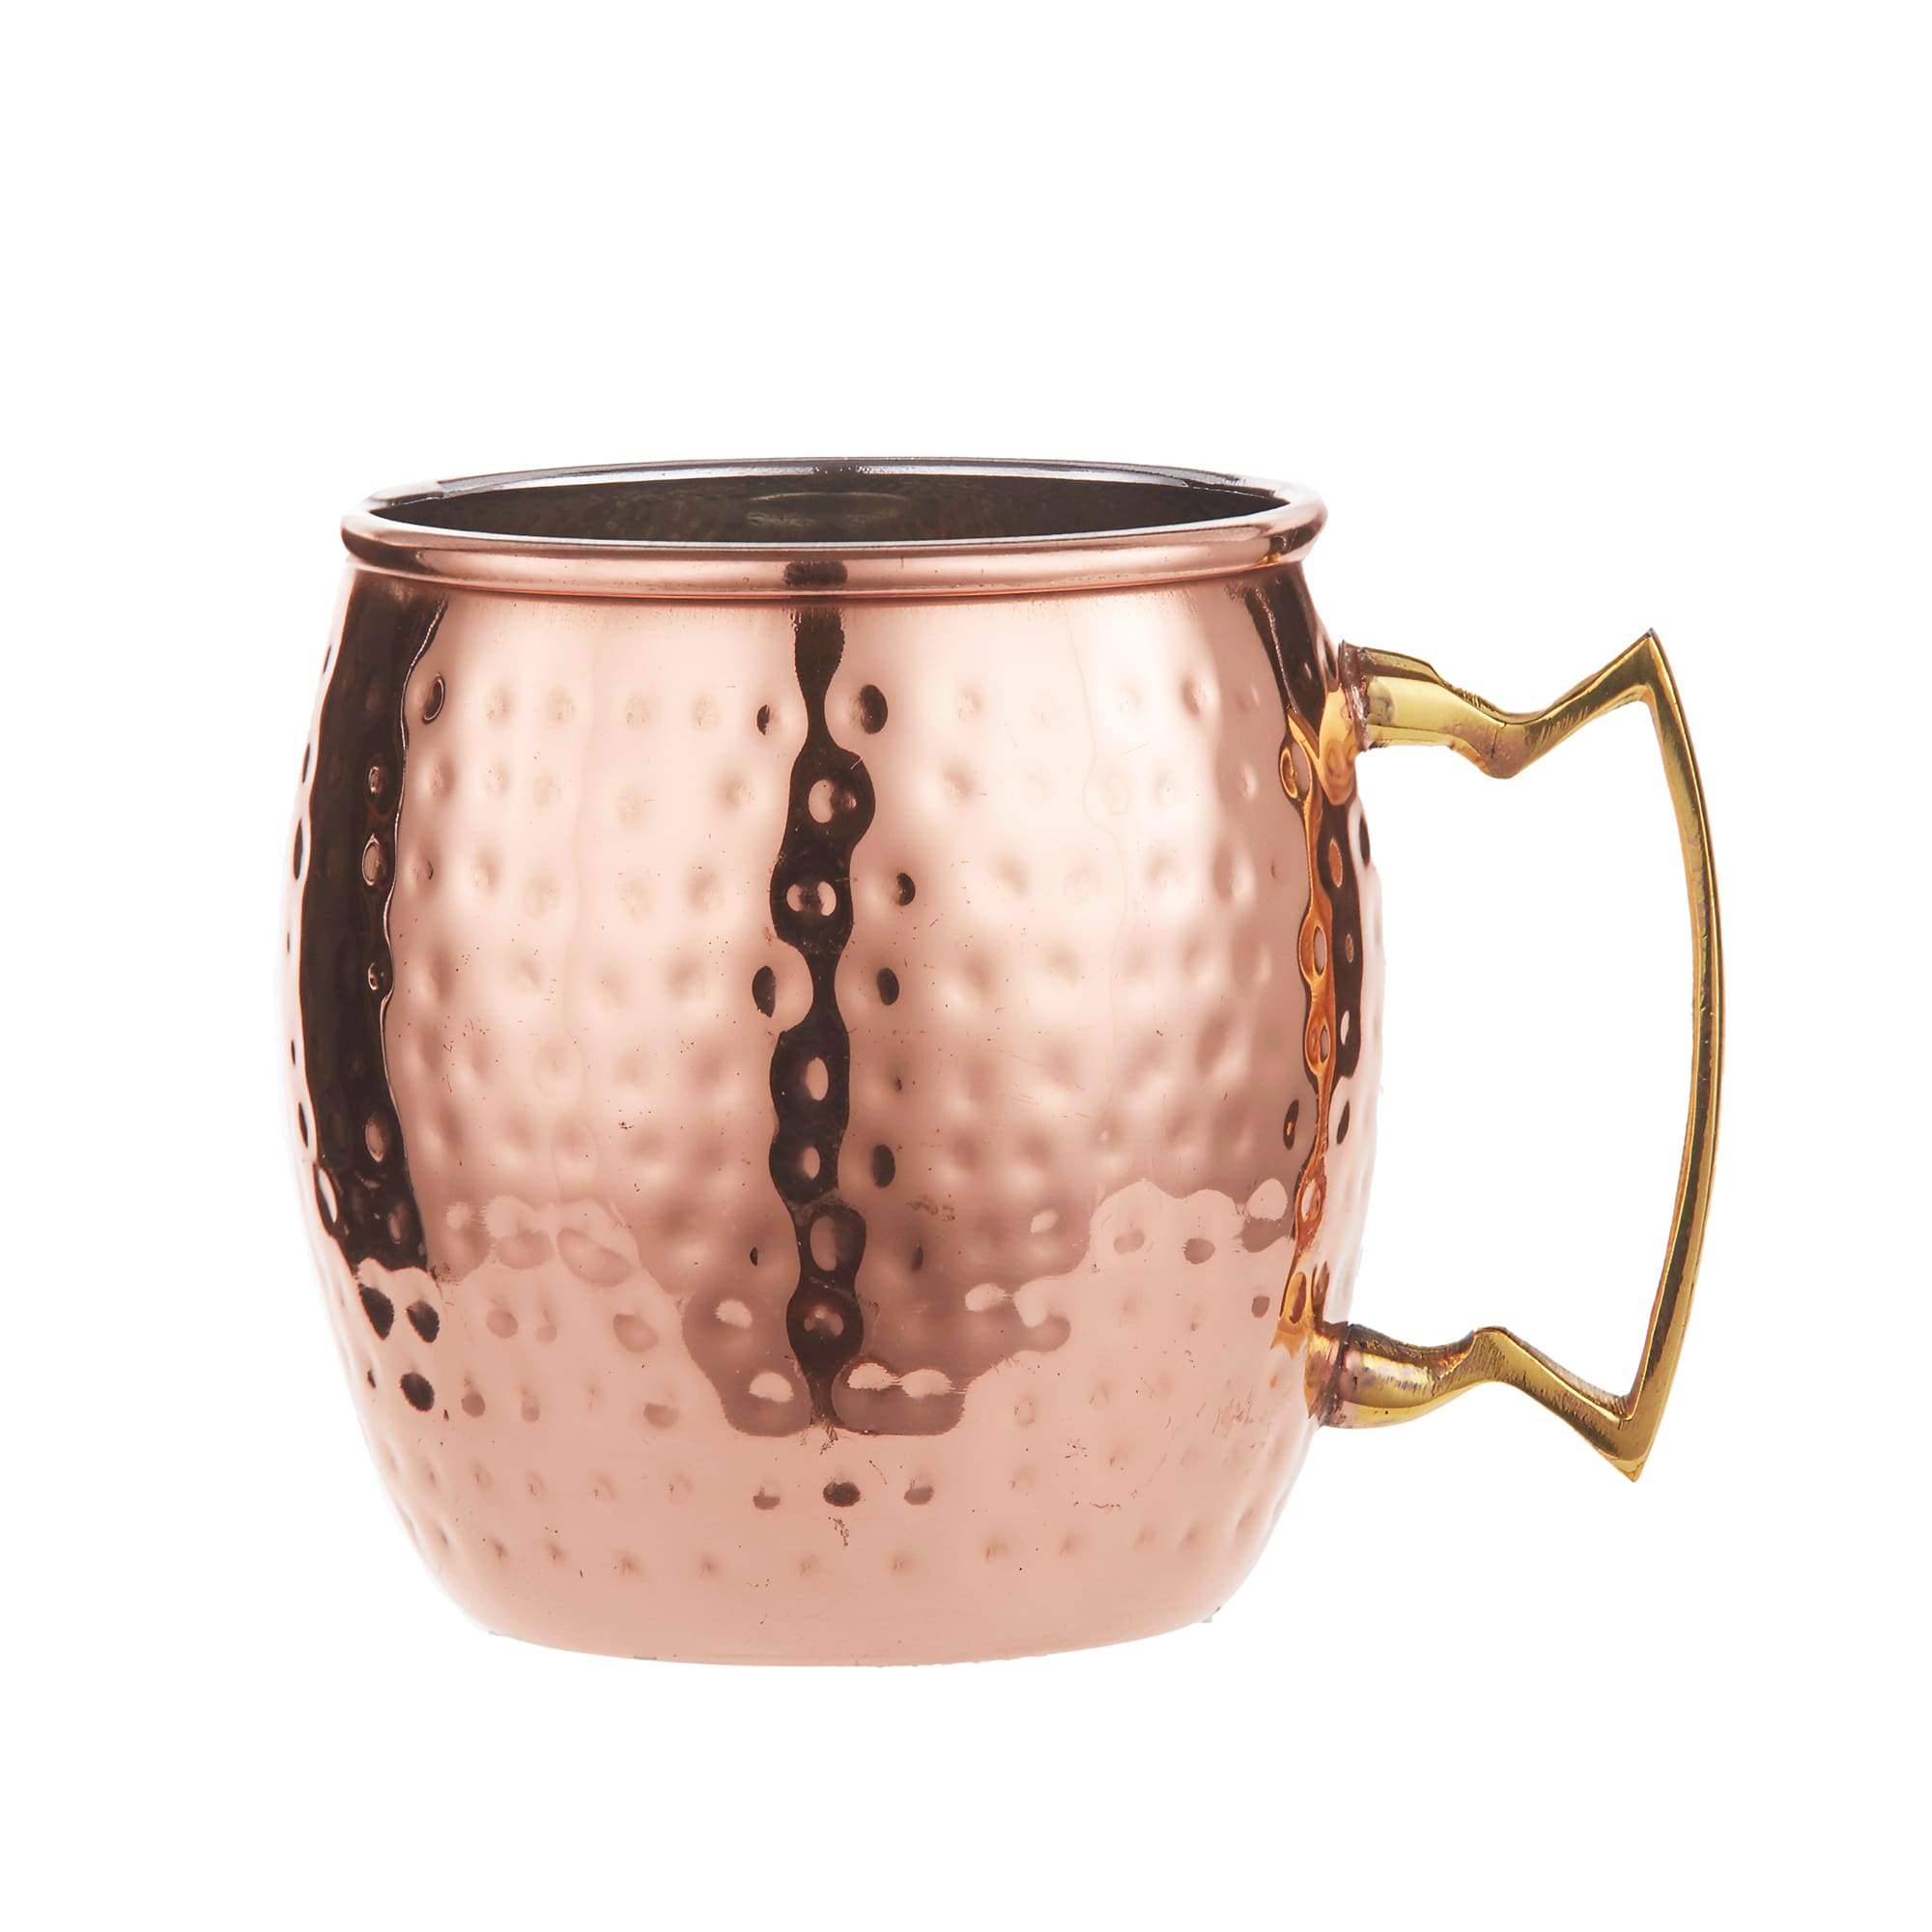 ZUCCOR ZMMN Stainless Steel Moscow Mule Mug W/Hammered Nickel Plated Exterior 4.125 X 5.25 X 3.5 